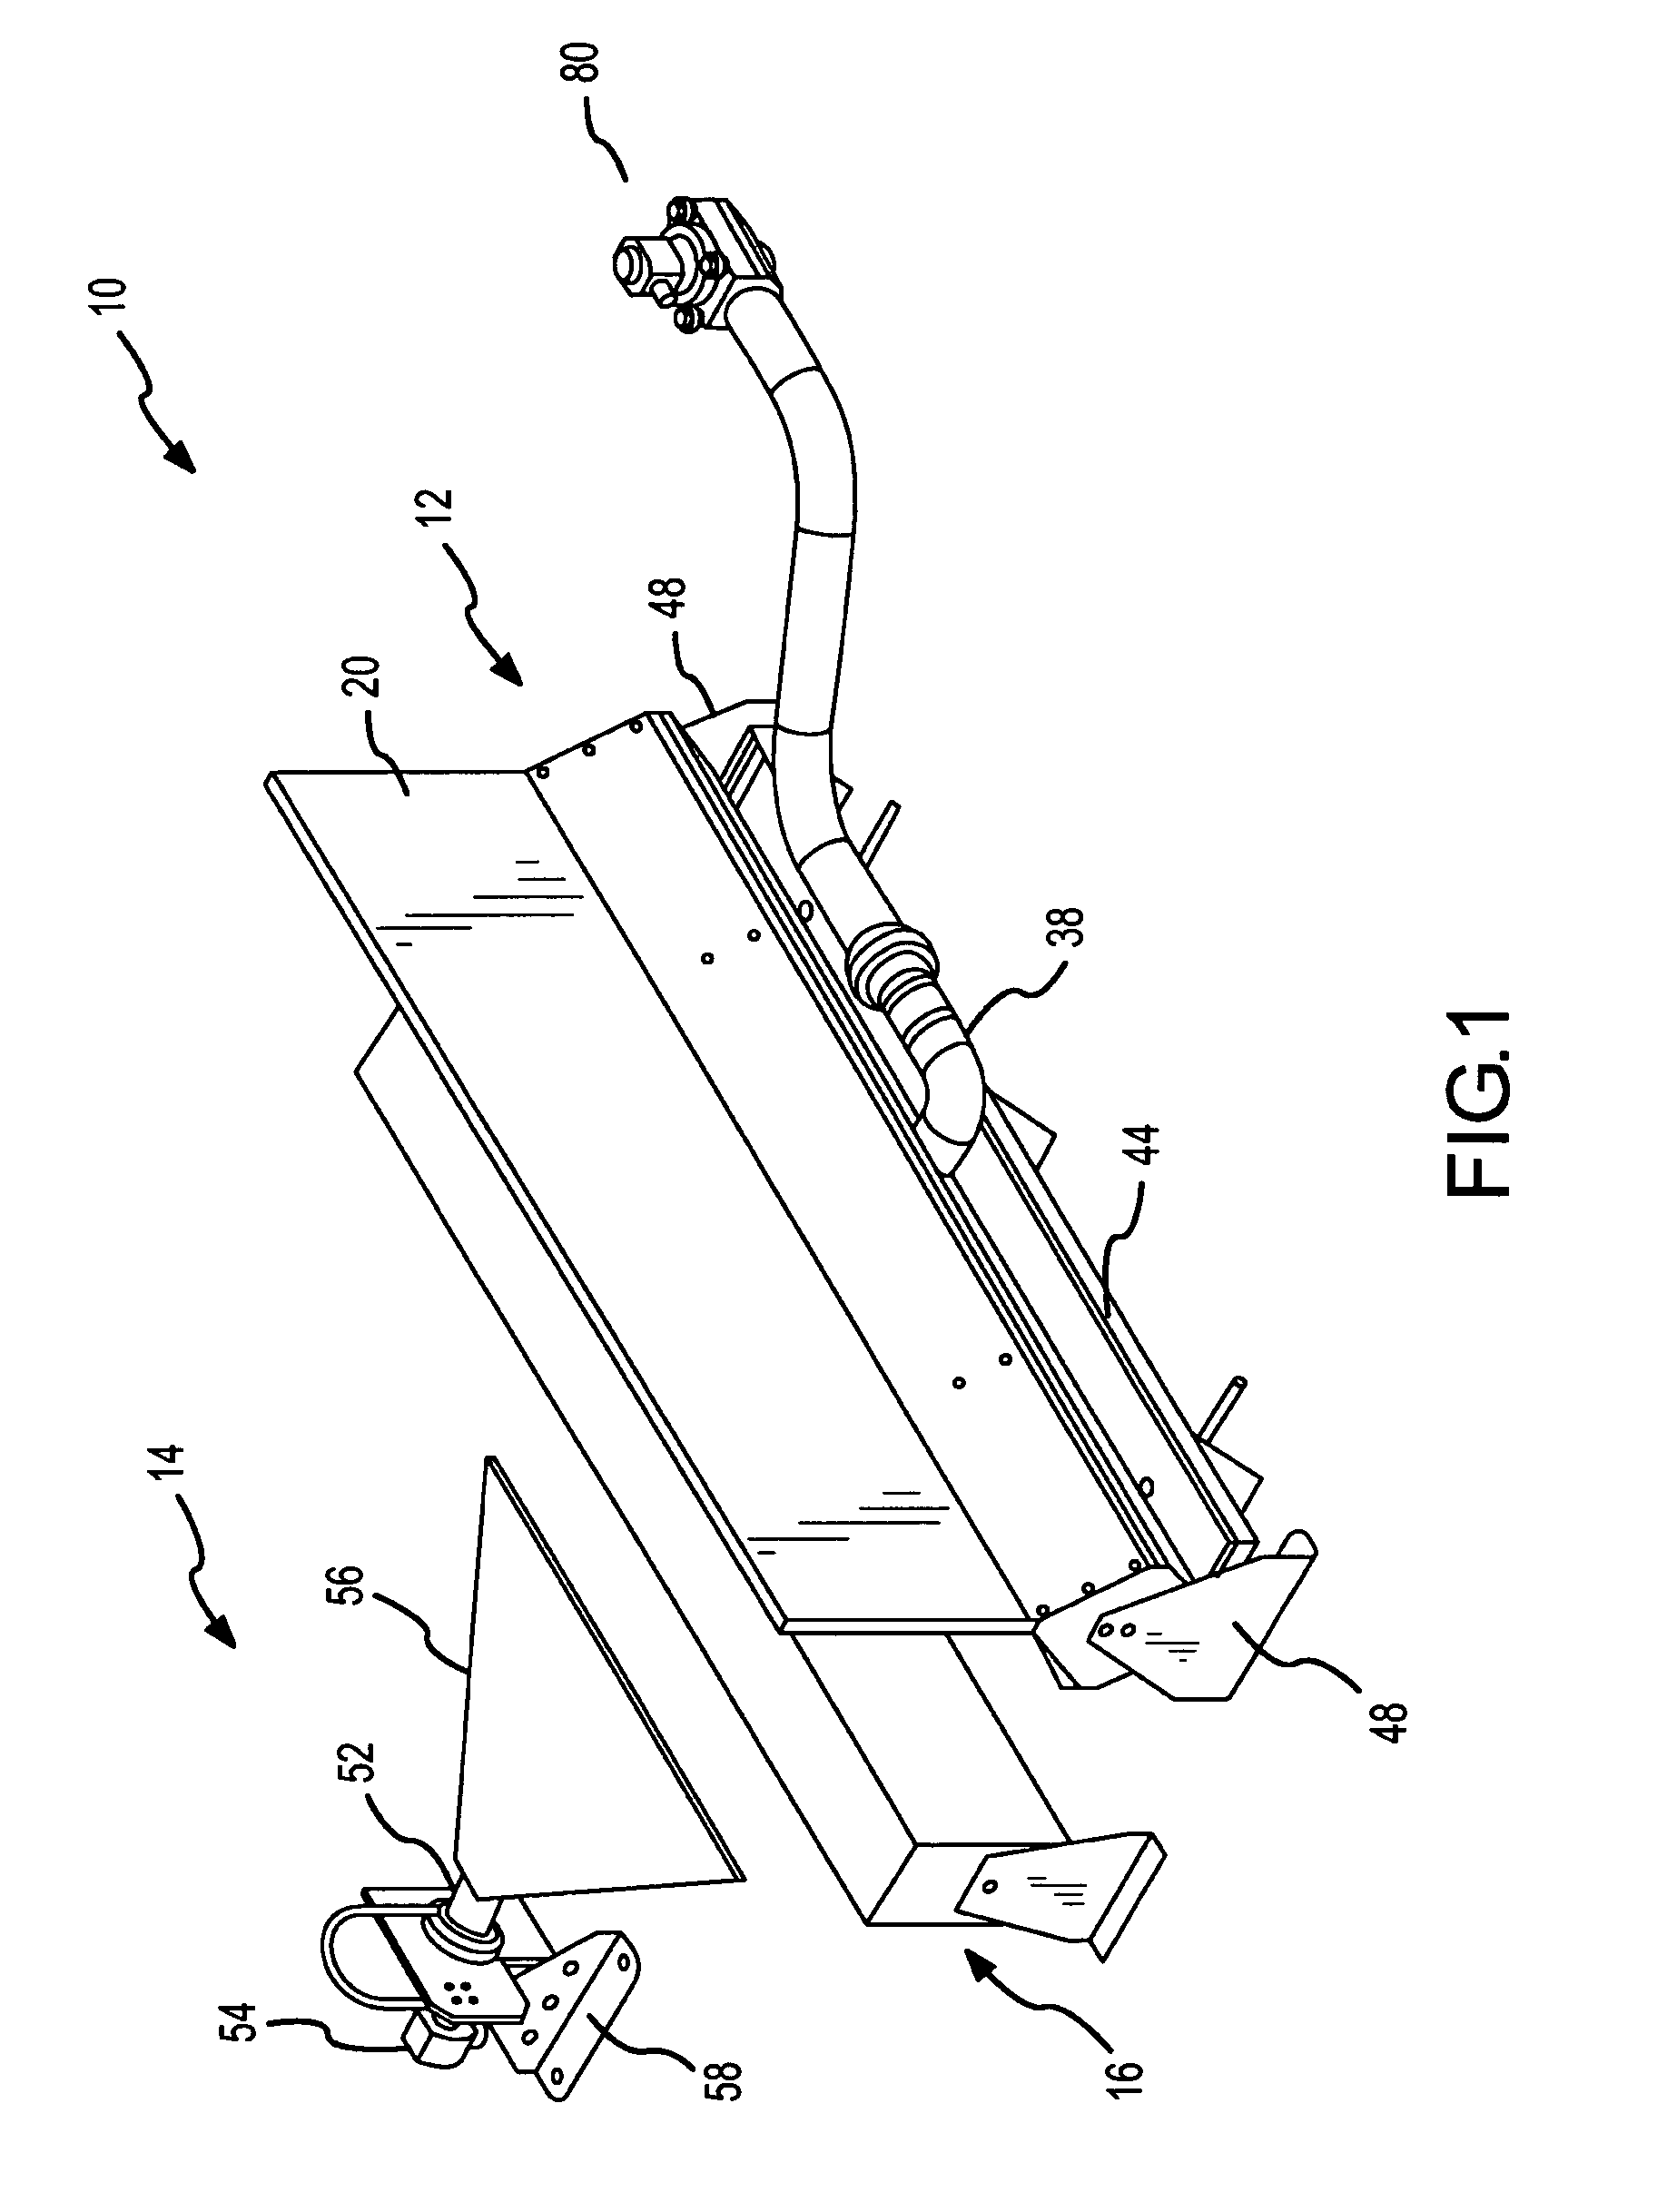 Apparatus for producing a fire special effect